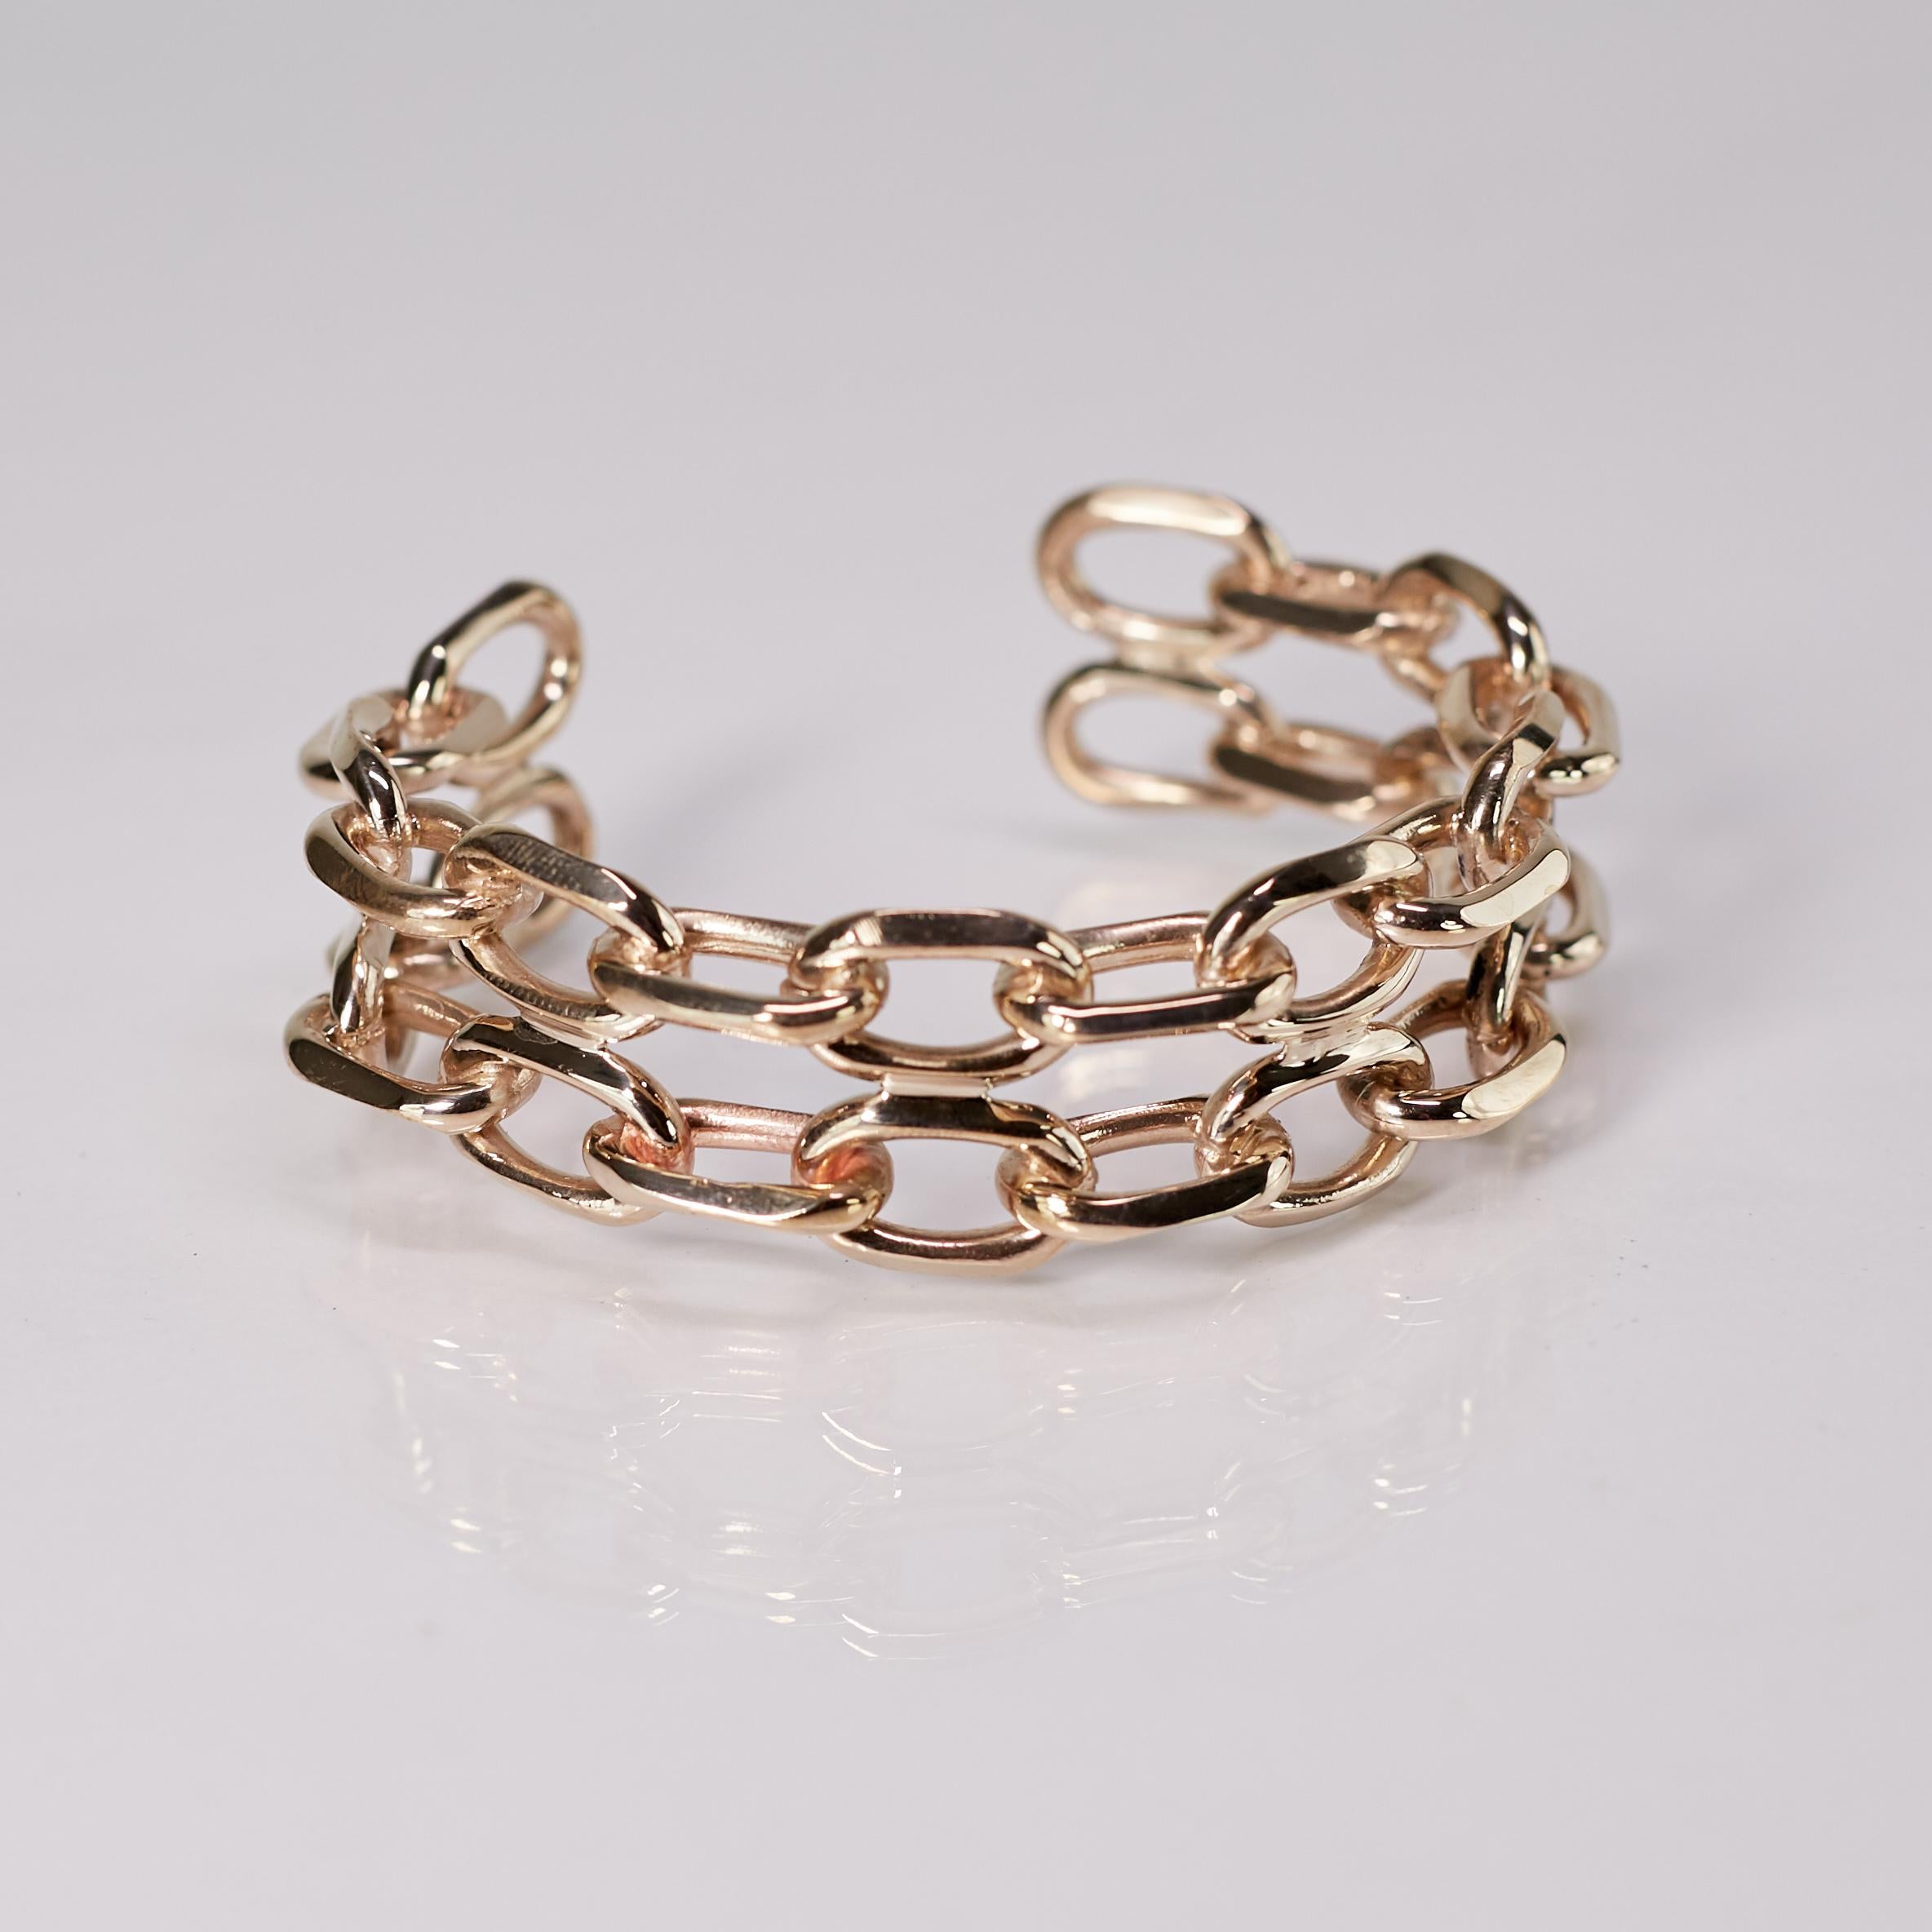 Chunky Chain Cuff Bangle Bracelet Bronze Statement Piece J Dauphin In New Condition For Sale In Los Angeles, CA